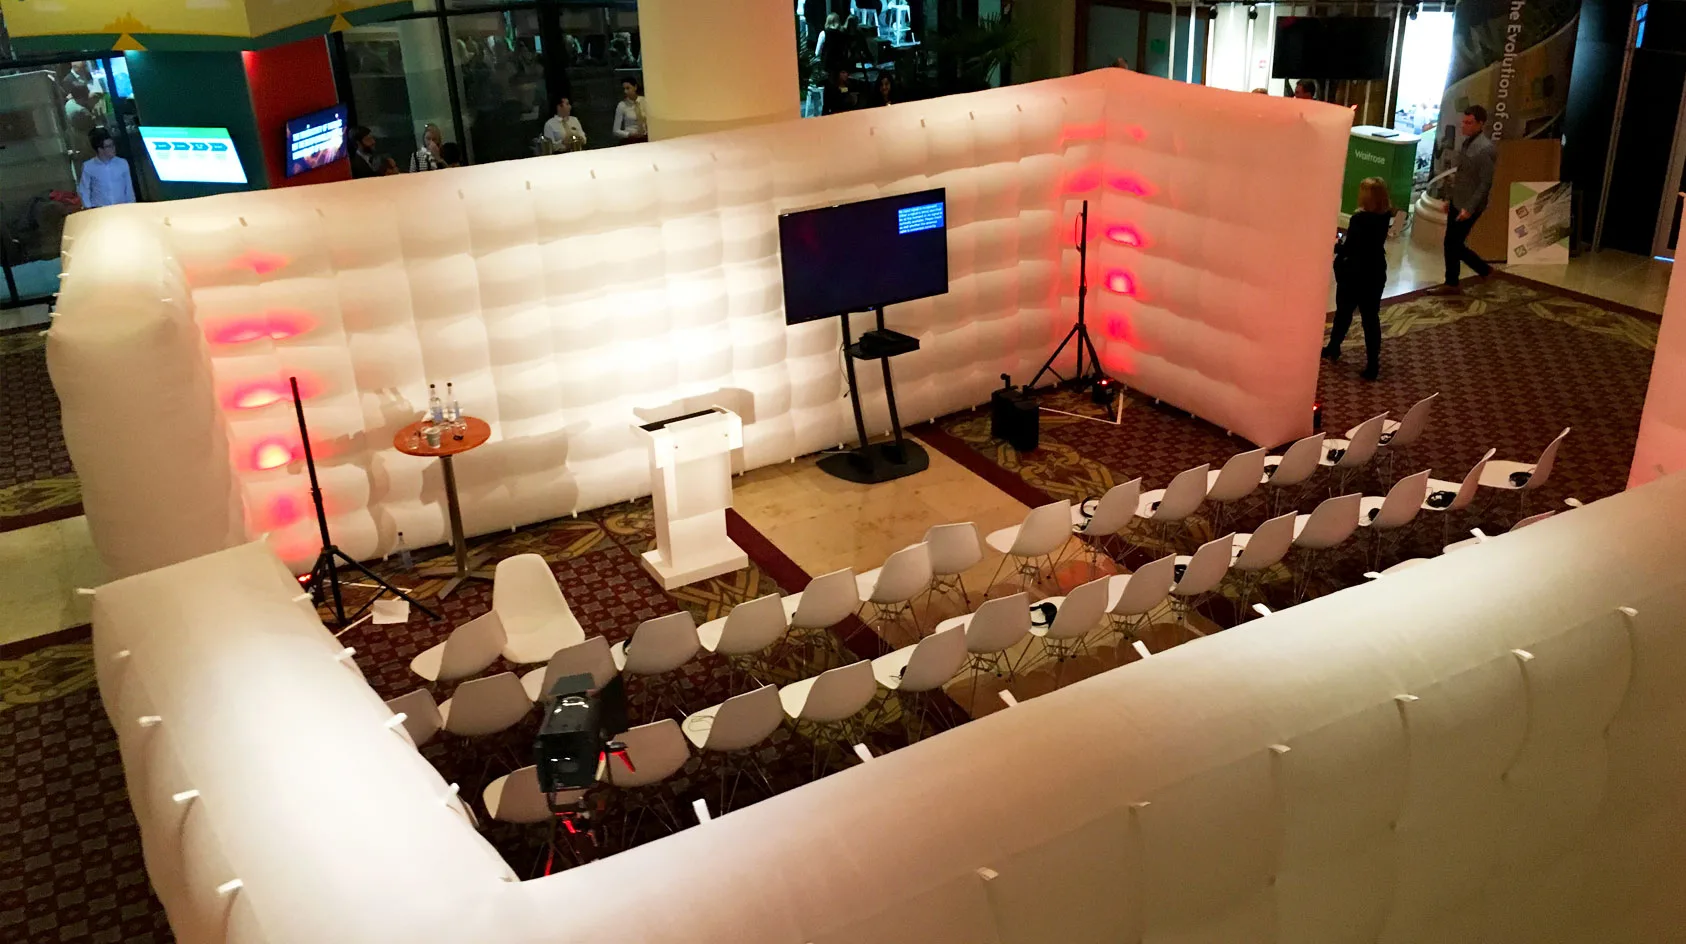 Pic showing two Created By Air Cubewall modular inflatable structures  setup to enclose a presentation seating area and screen